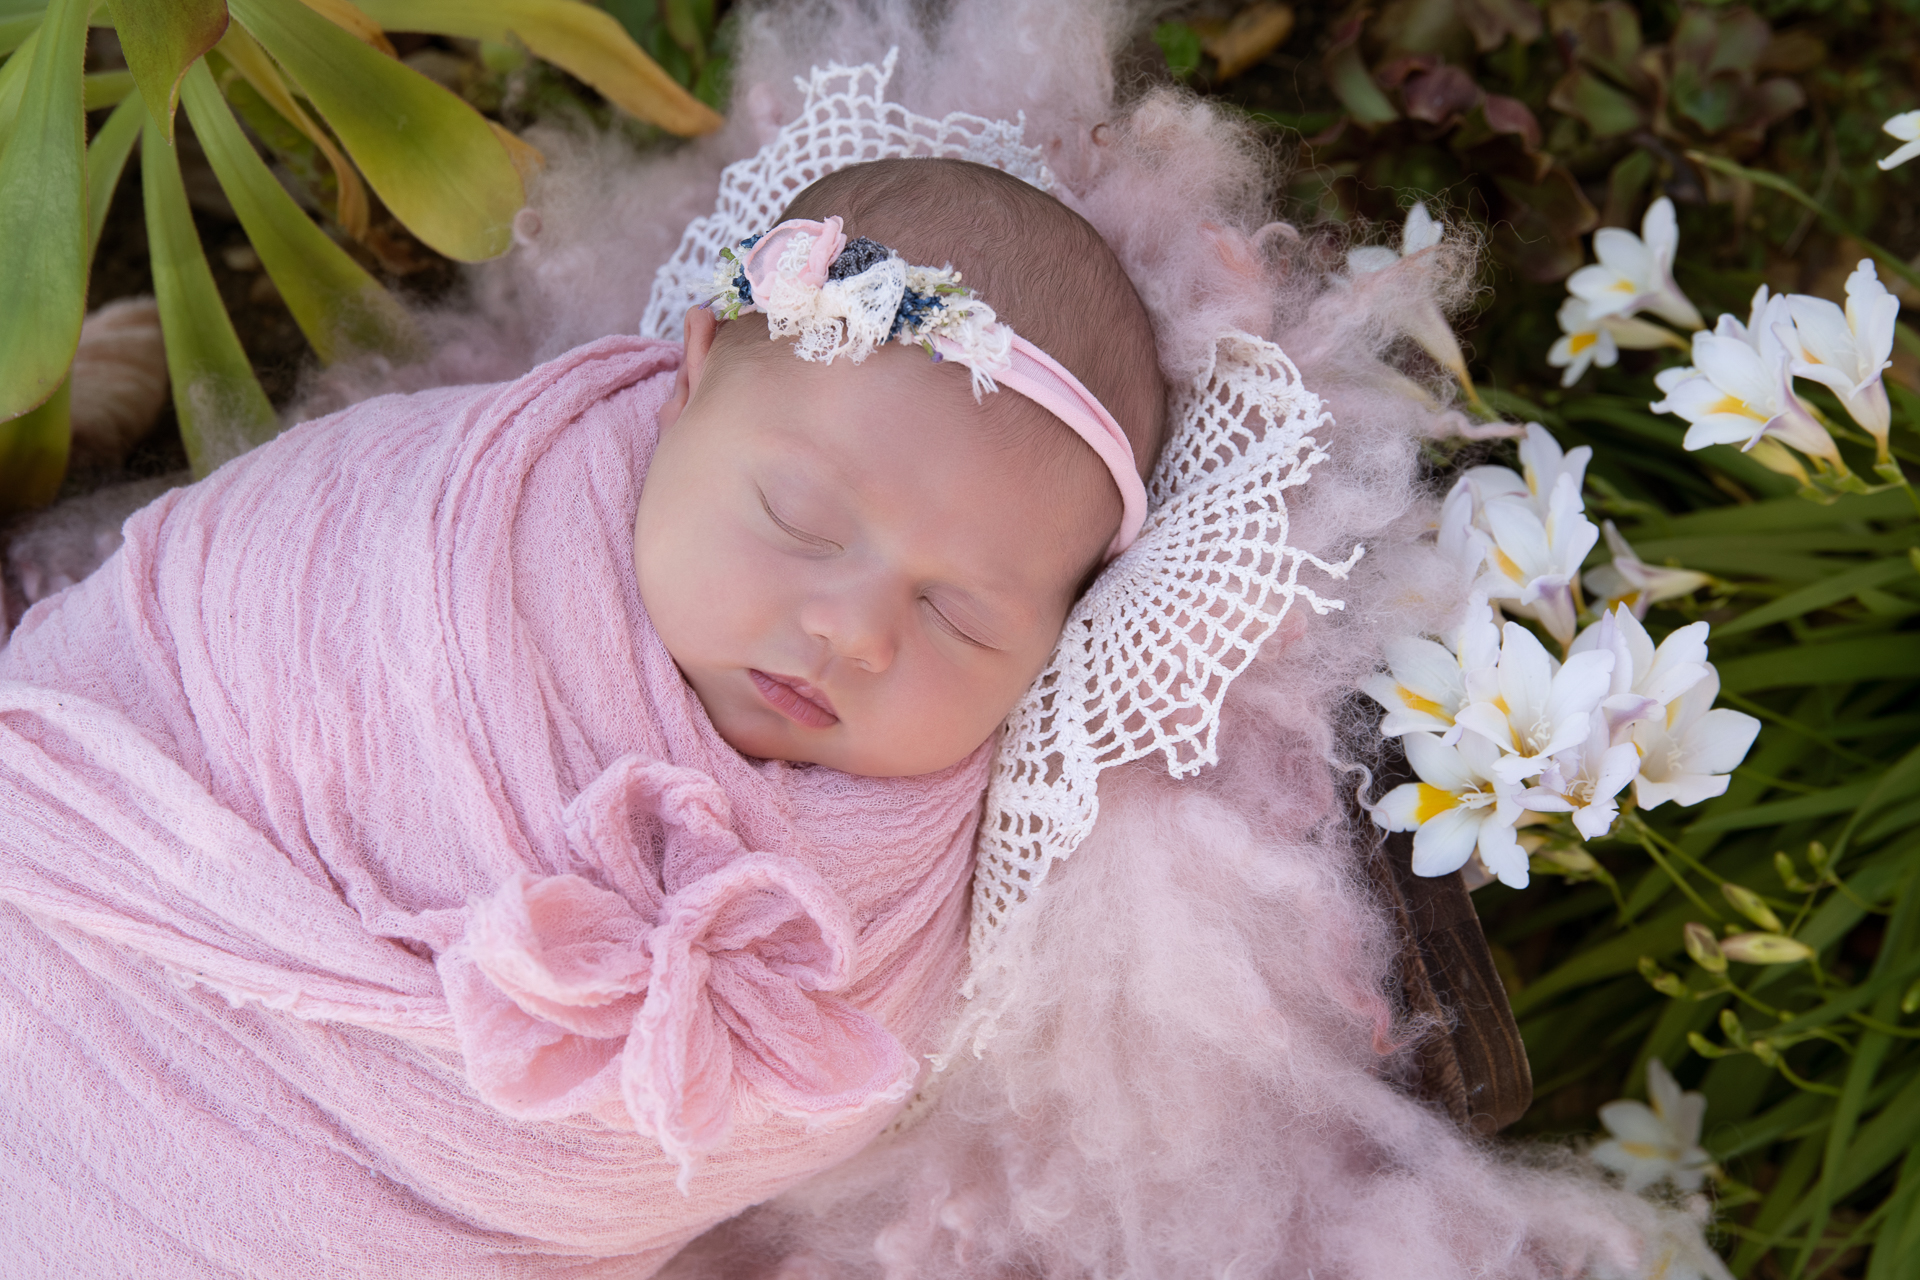 Newborn baby girl wears pink wrap and headband while resting on prop outdoors